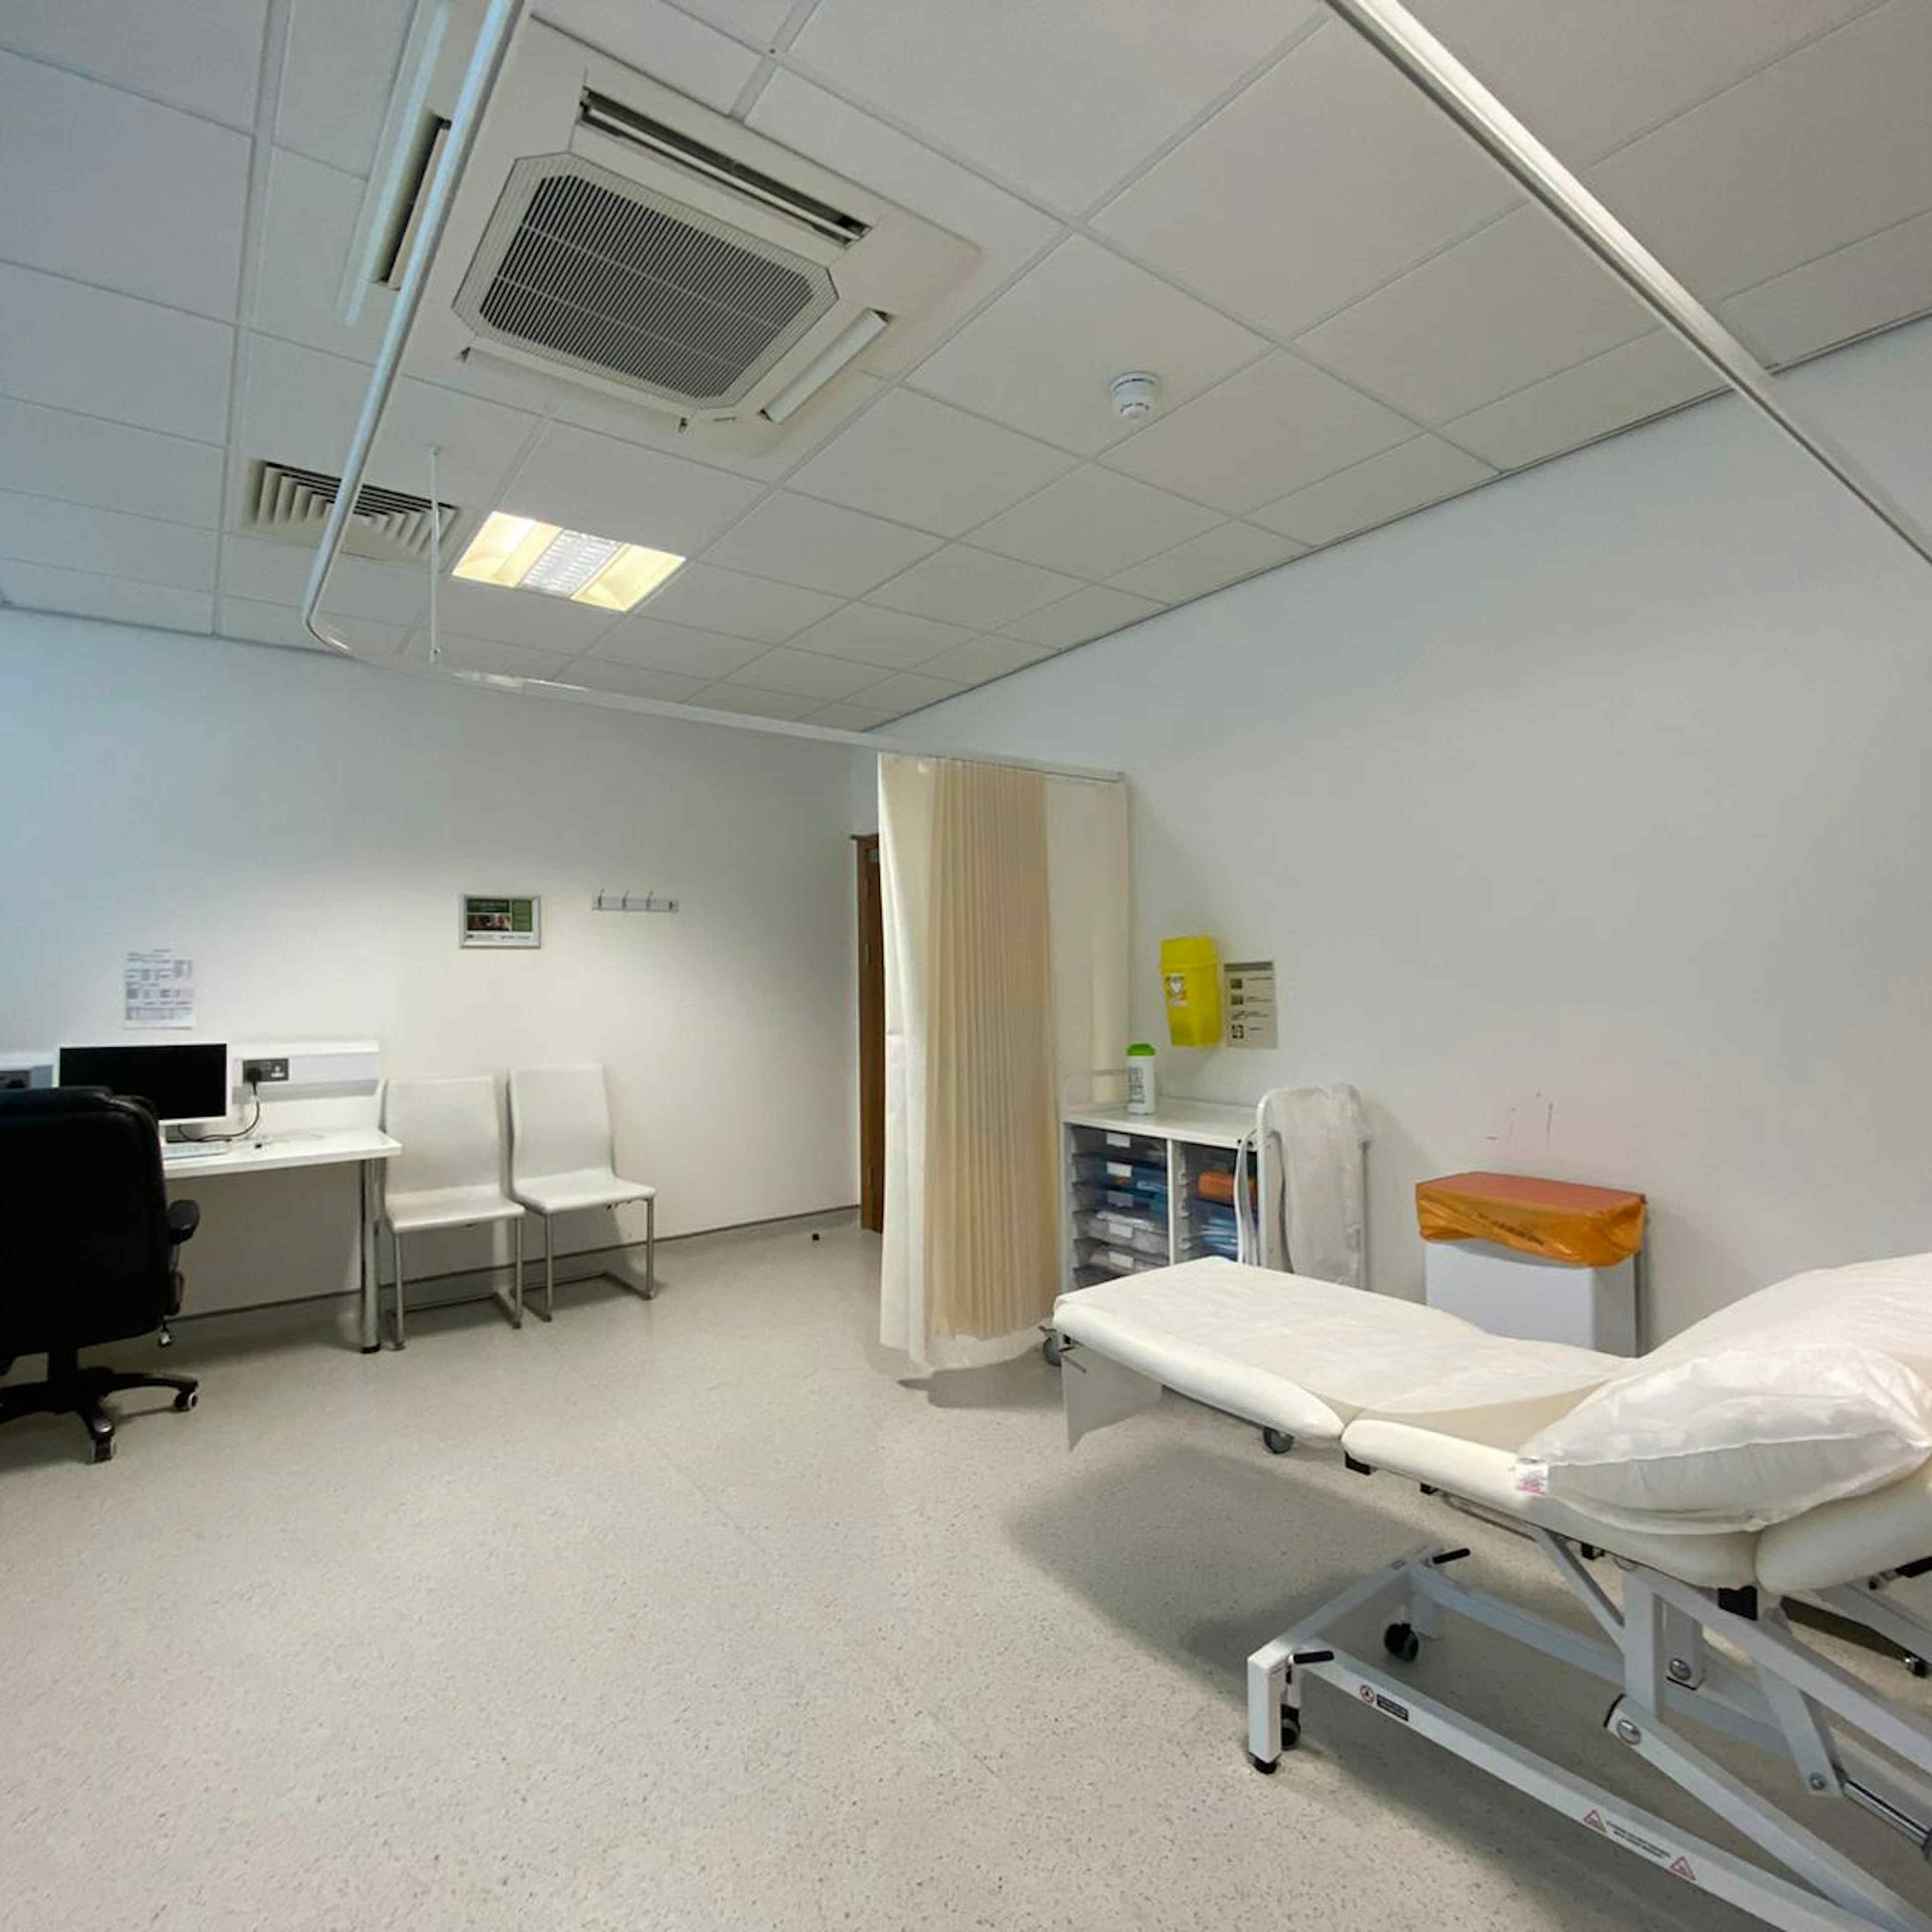 Pall Mall Medical & Cosmetic - Rooms for Hire  image 3